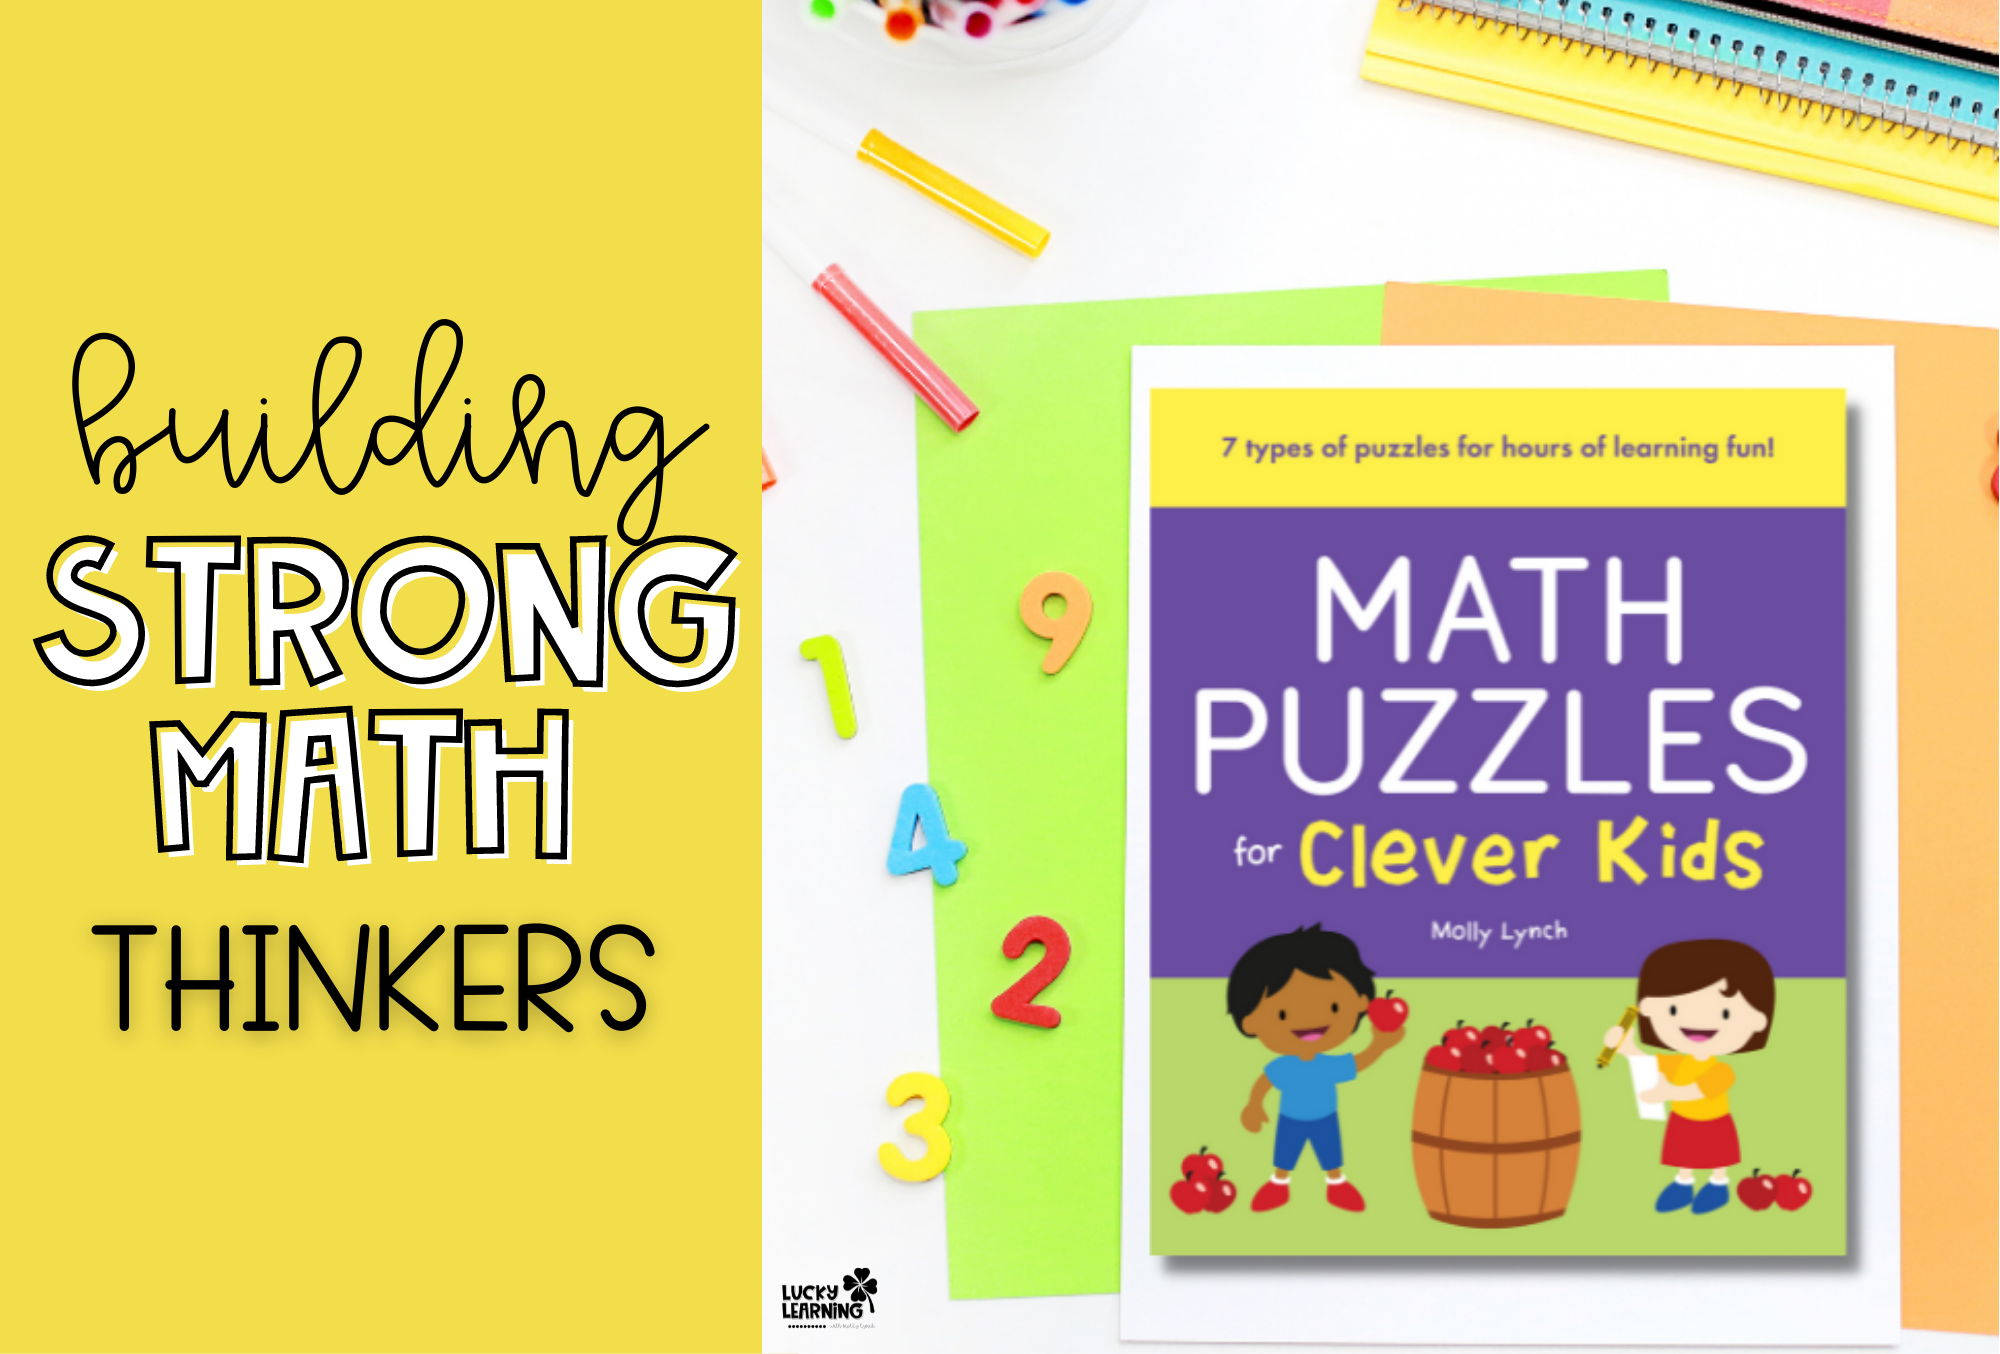 Math Puzzles for Clever Kids | Lucky Learning with Molly Lynch